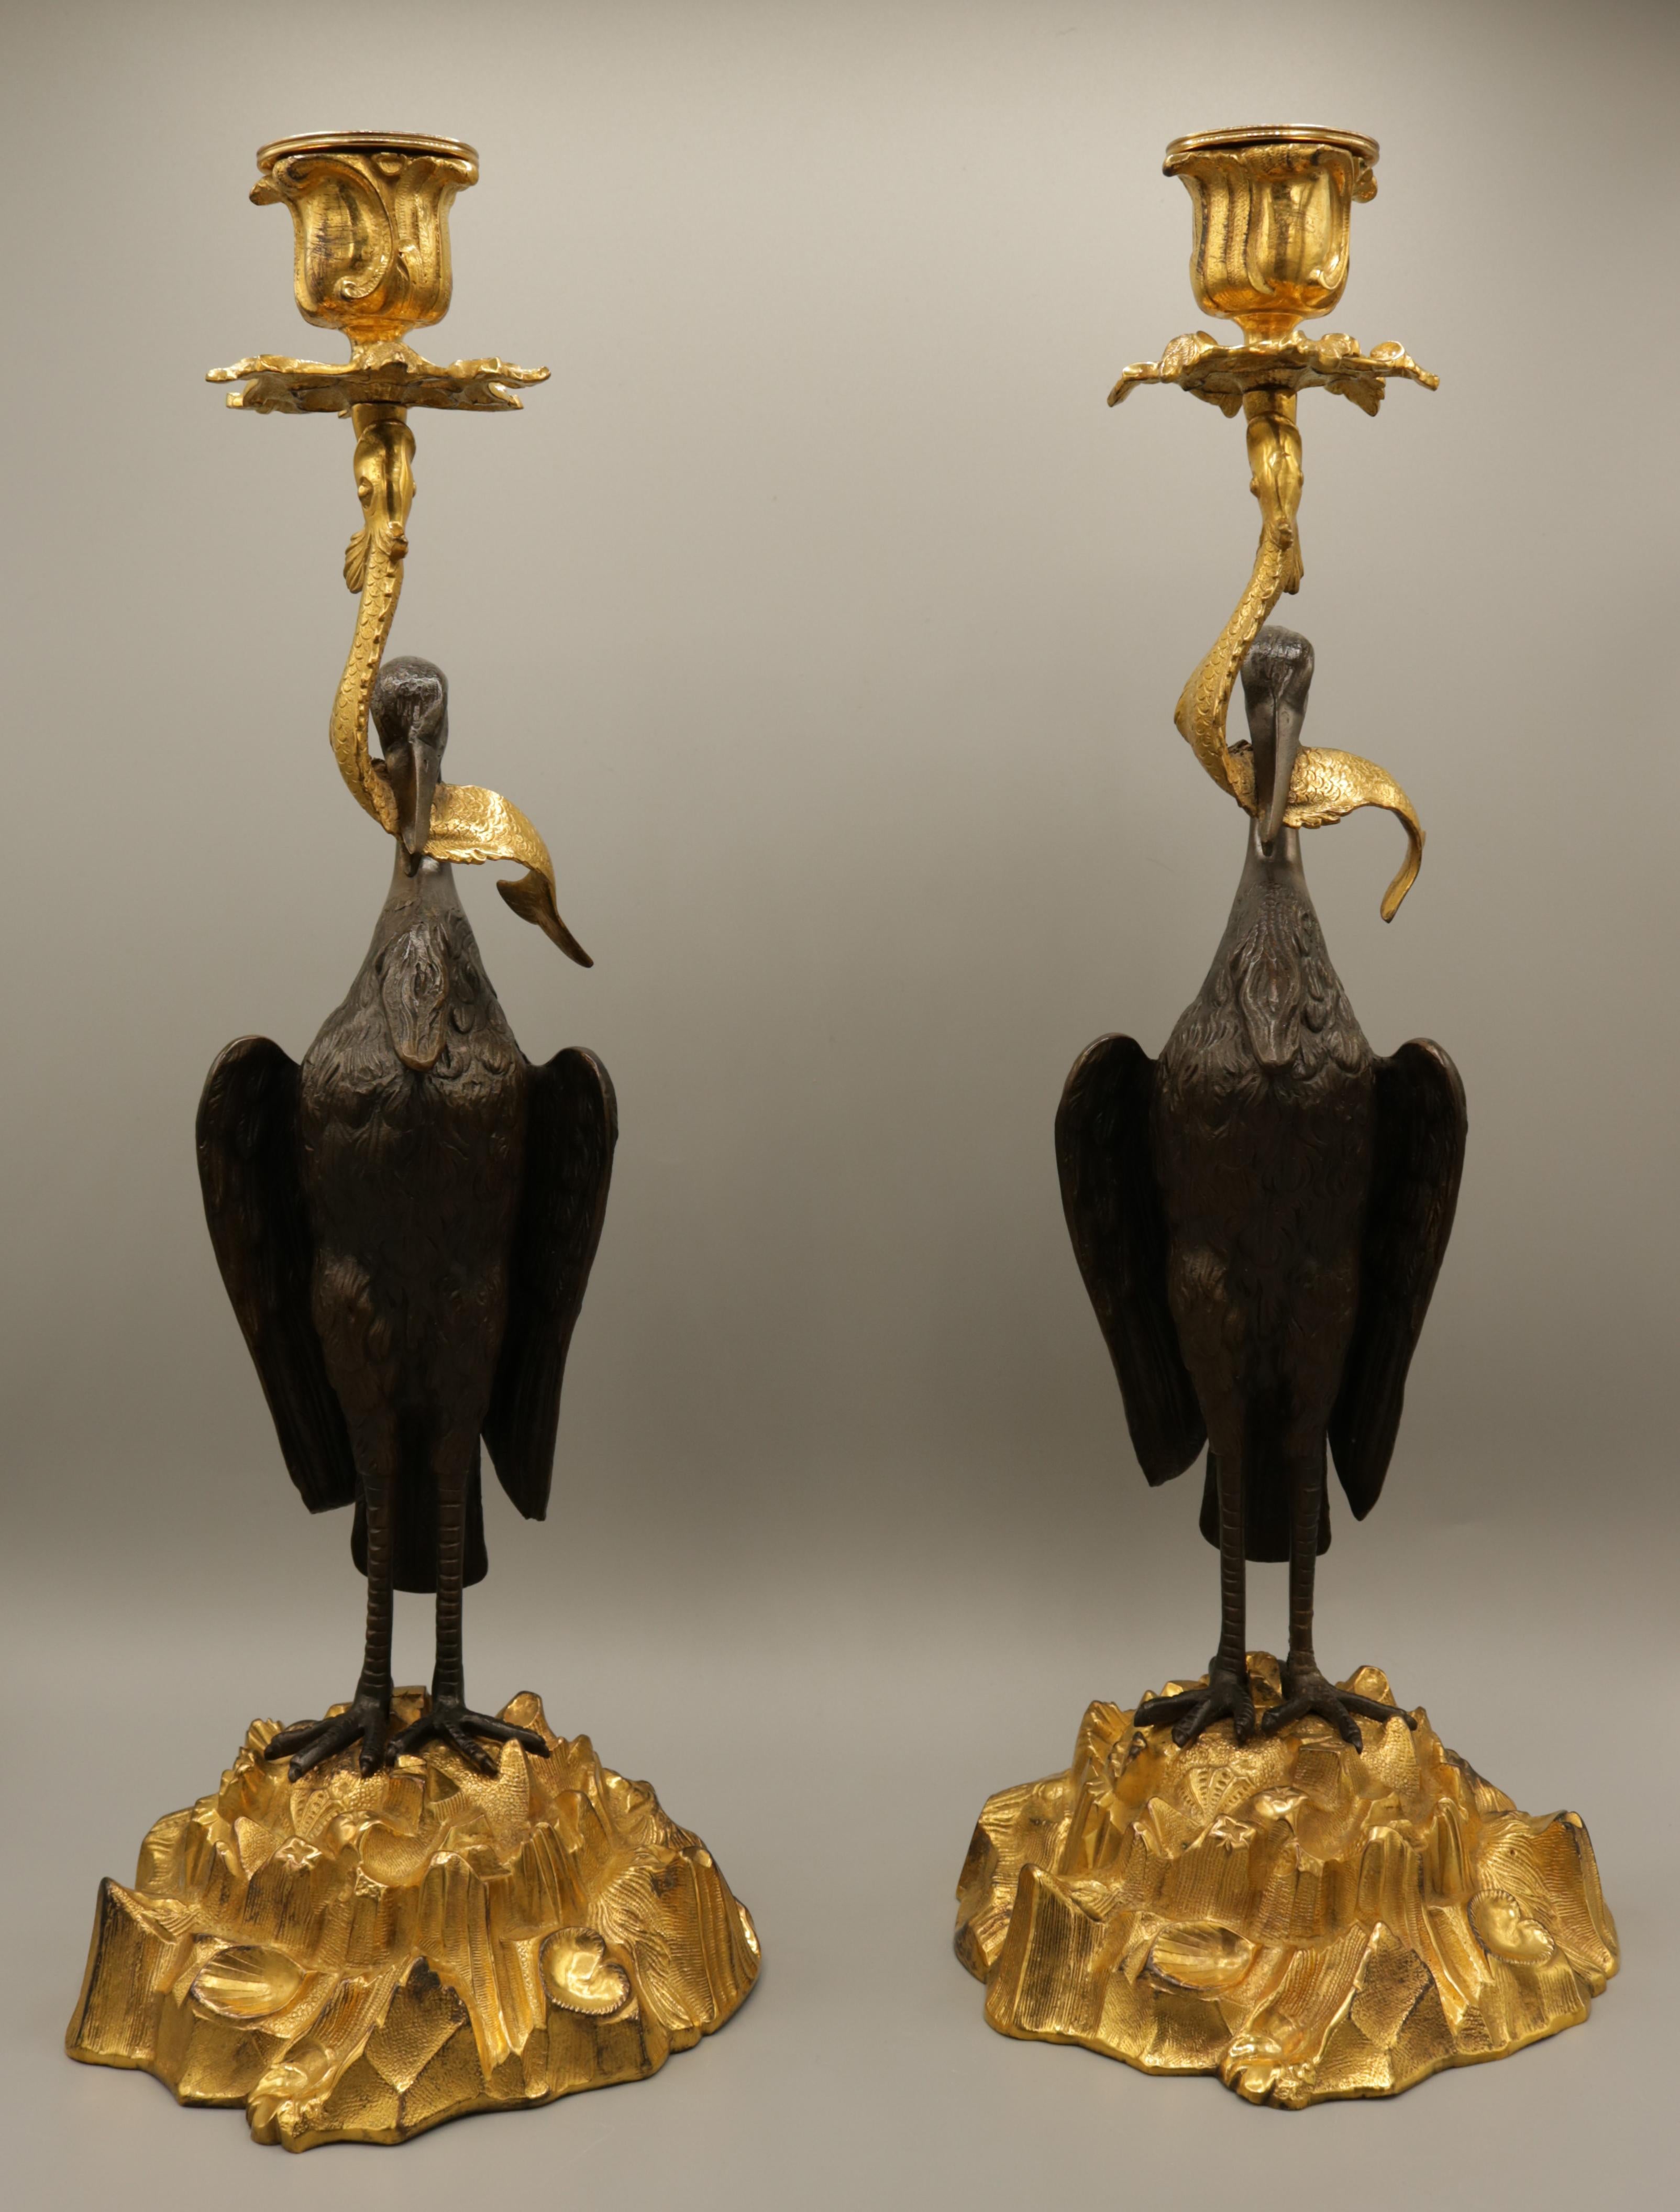 An unusual pair of mid-19th century bronze and ormolu candlesticks, having rococo candleholders above well cast herons holding stylised fish, raised on rock and shell bases, retaining original iron weights.
(Probably by Thomas Abbott of Birmingham.)